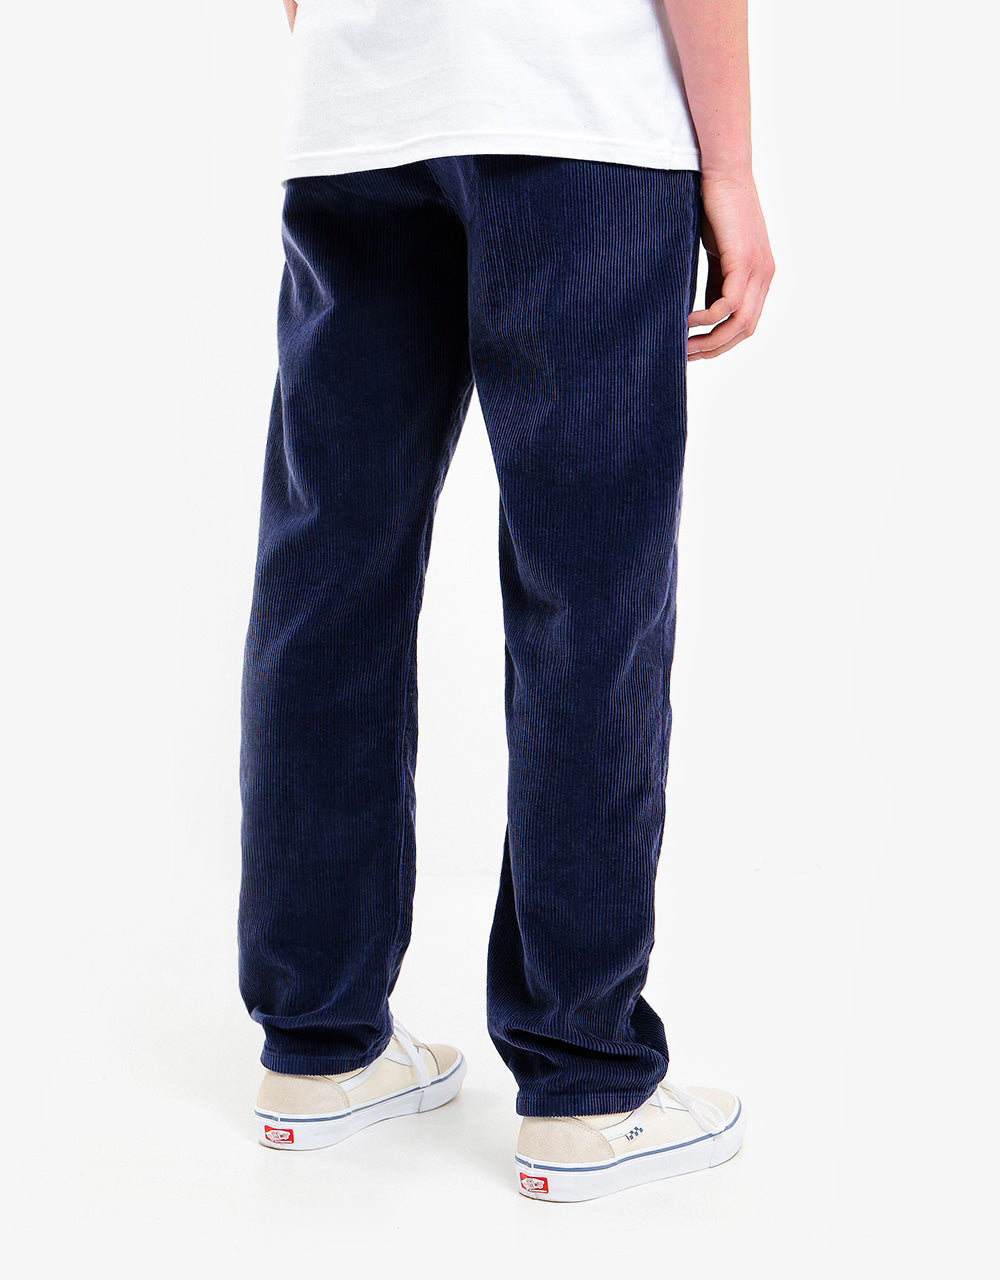 Route One Relaxed Fit Big Wale Cords - Navy